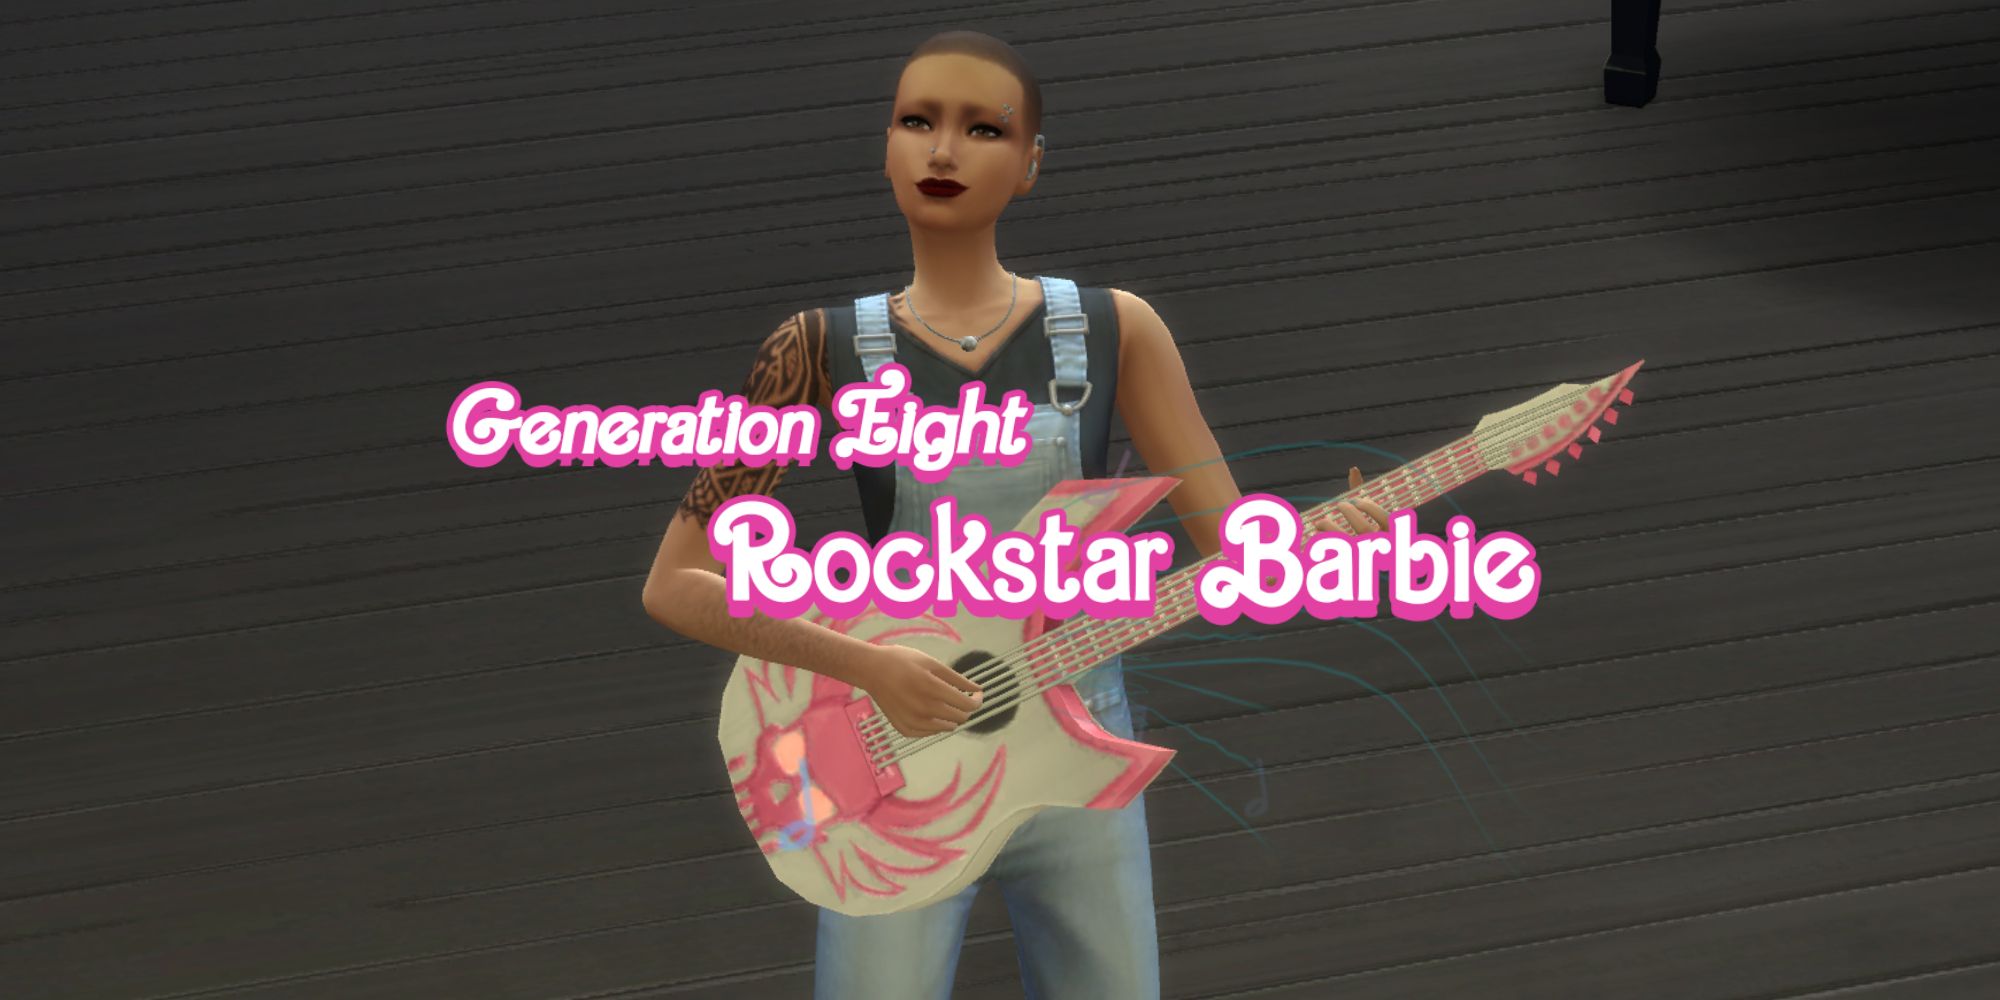 Rockstar Barbie jams on her guitar and represents generation eight of the Barbie Legacy Challenge (The Sims 4)